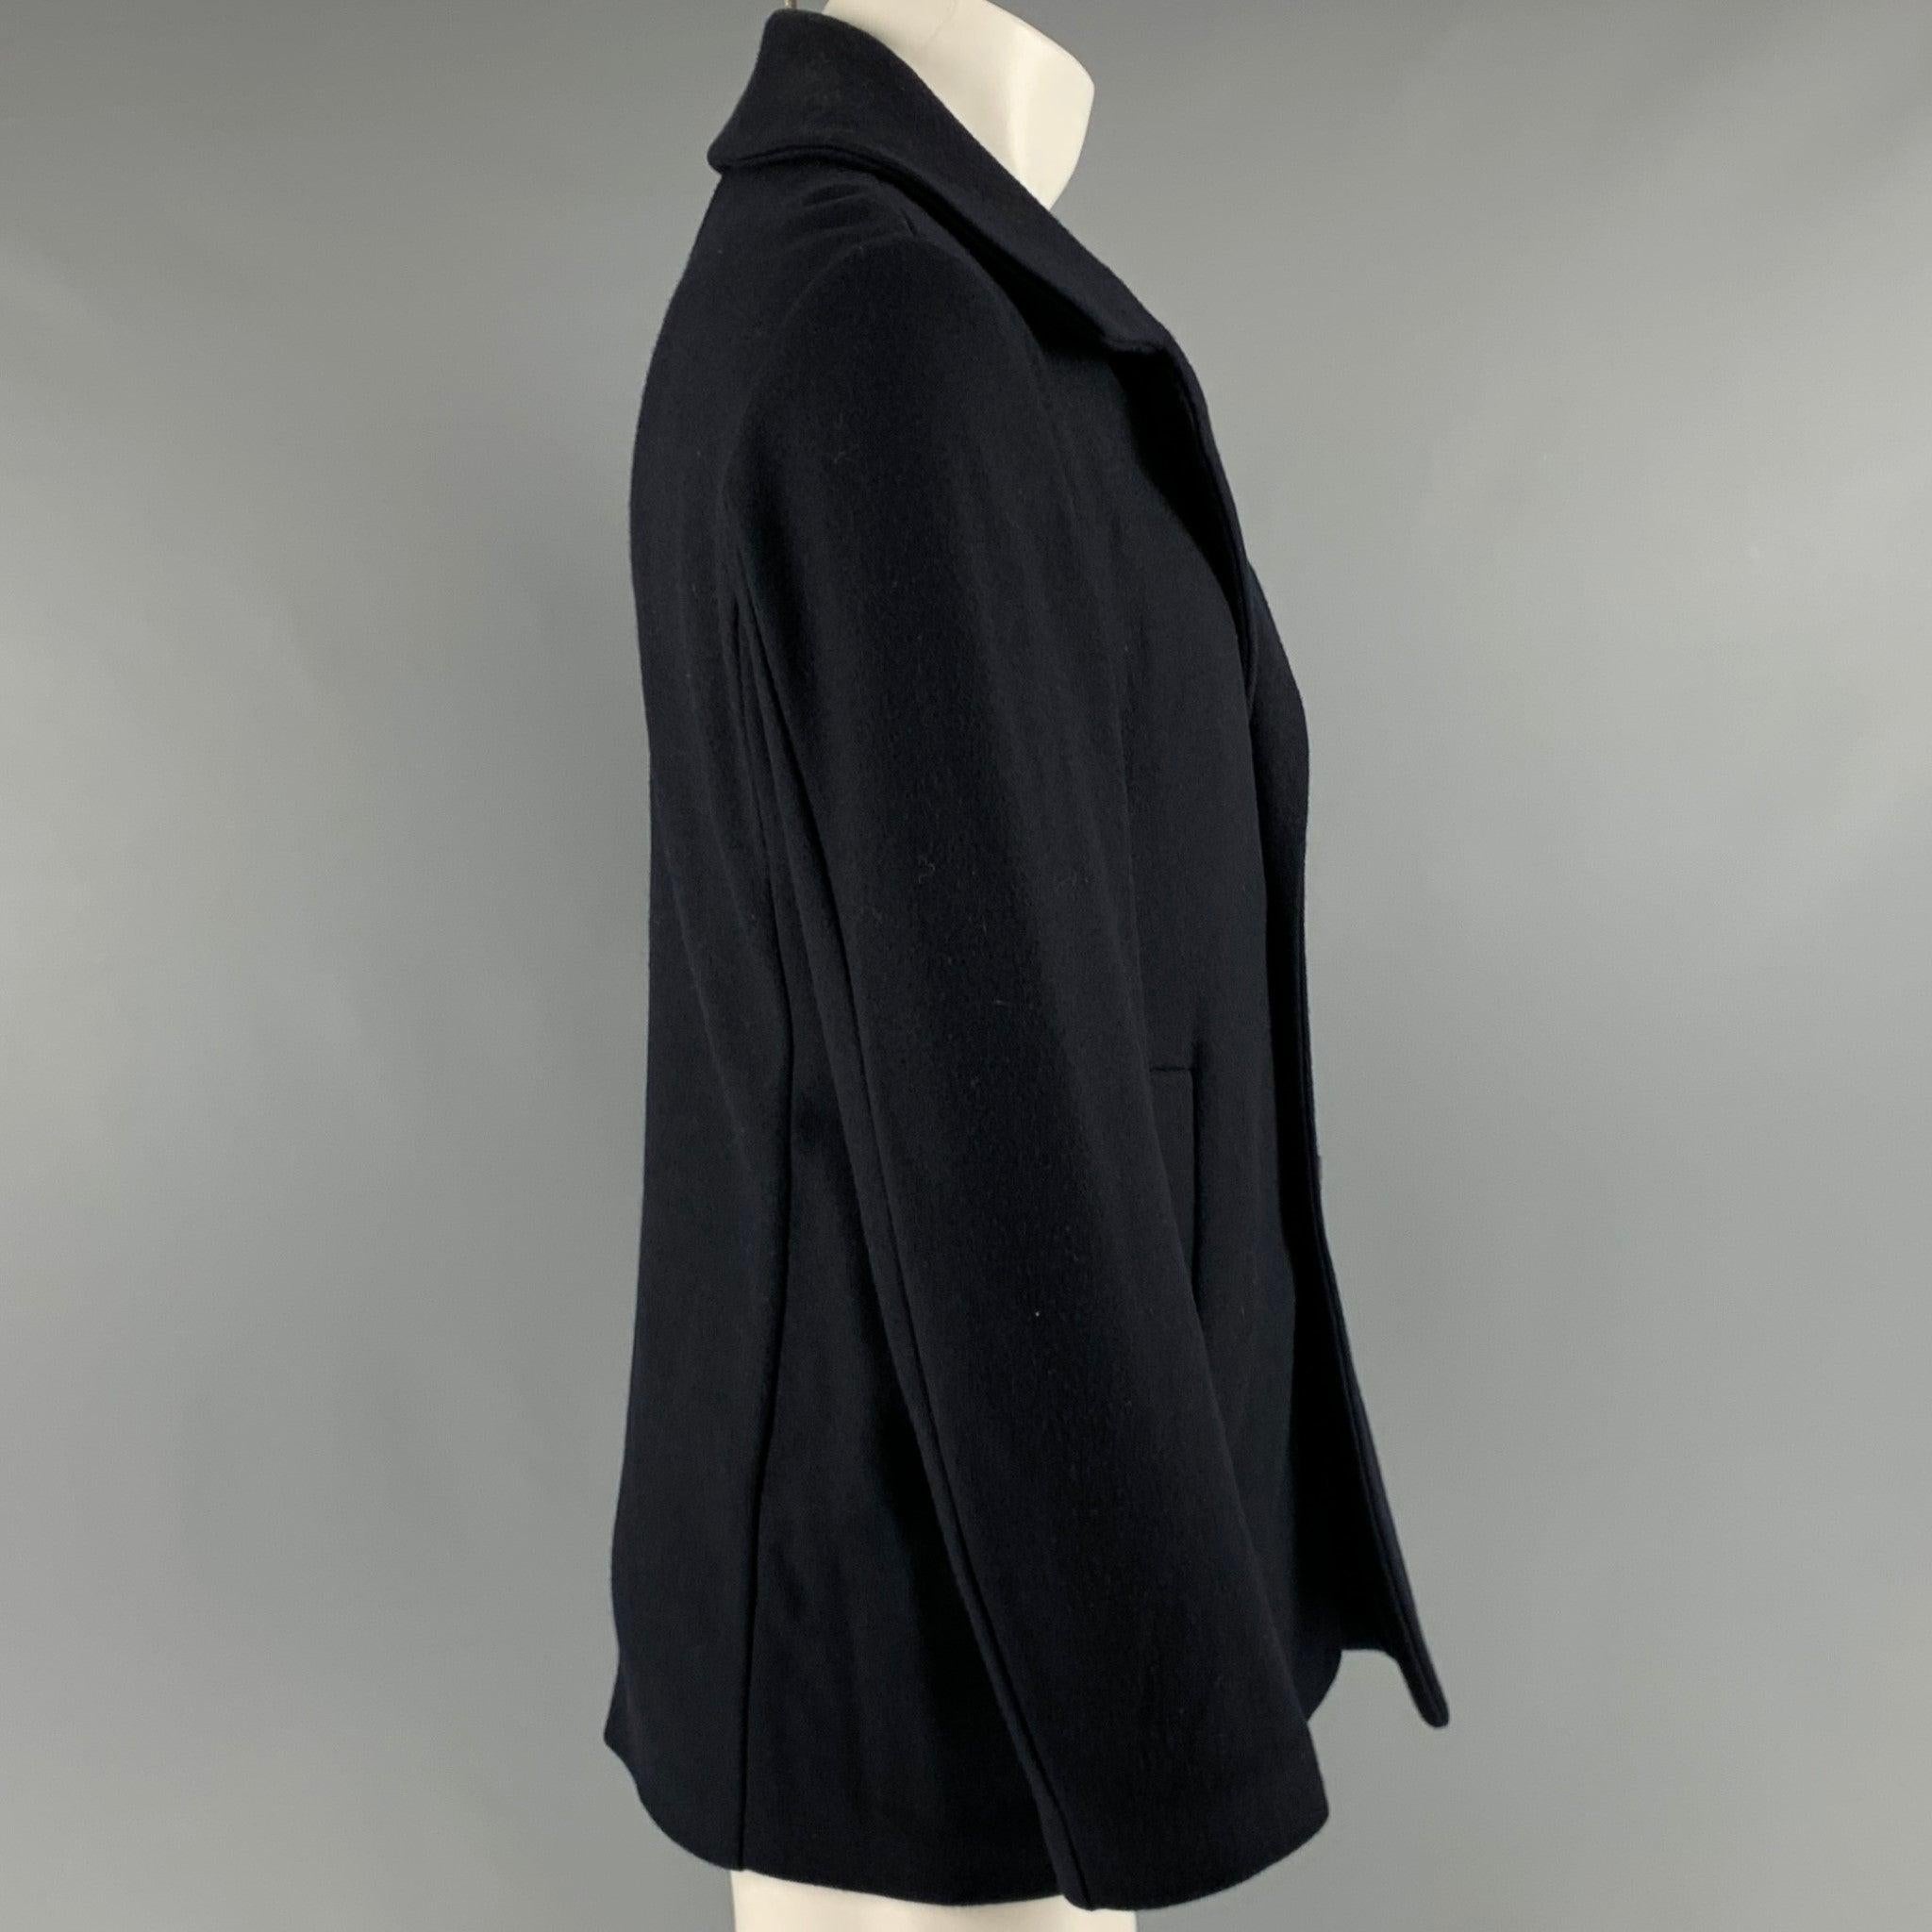 JIL SANDER coat
in a navy wool fabric featuring a double breasted peacoat style, two pockets, and button closure. Made in Italy.Excellent Pre-Owned Condition. 

Marked:   size not marked, size tag removed. 

Measurements: 
 
Shoulder: 16.5 inches